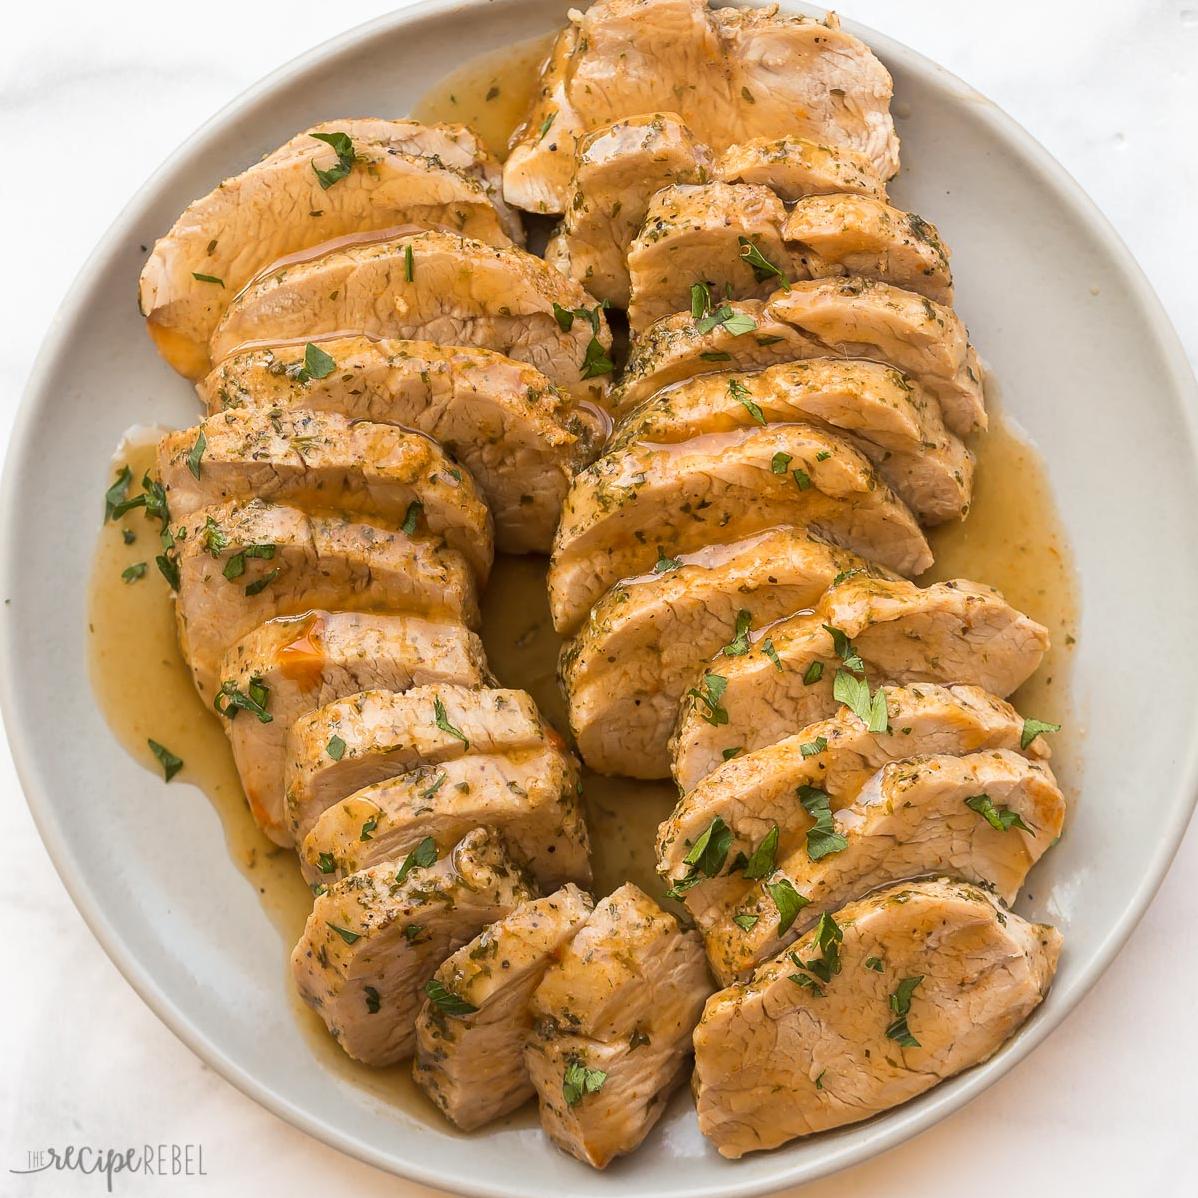  Impress your dinner guests with this flavorful Instant Pot Garlic Pork Tenderloin.